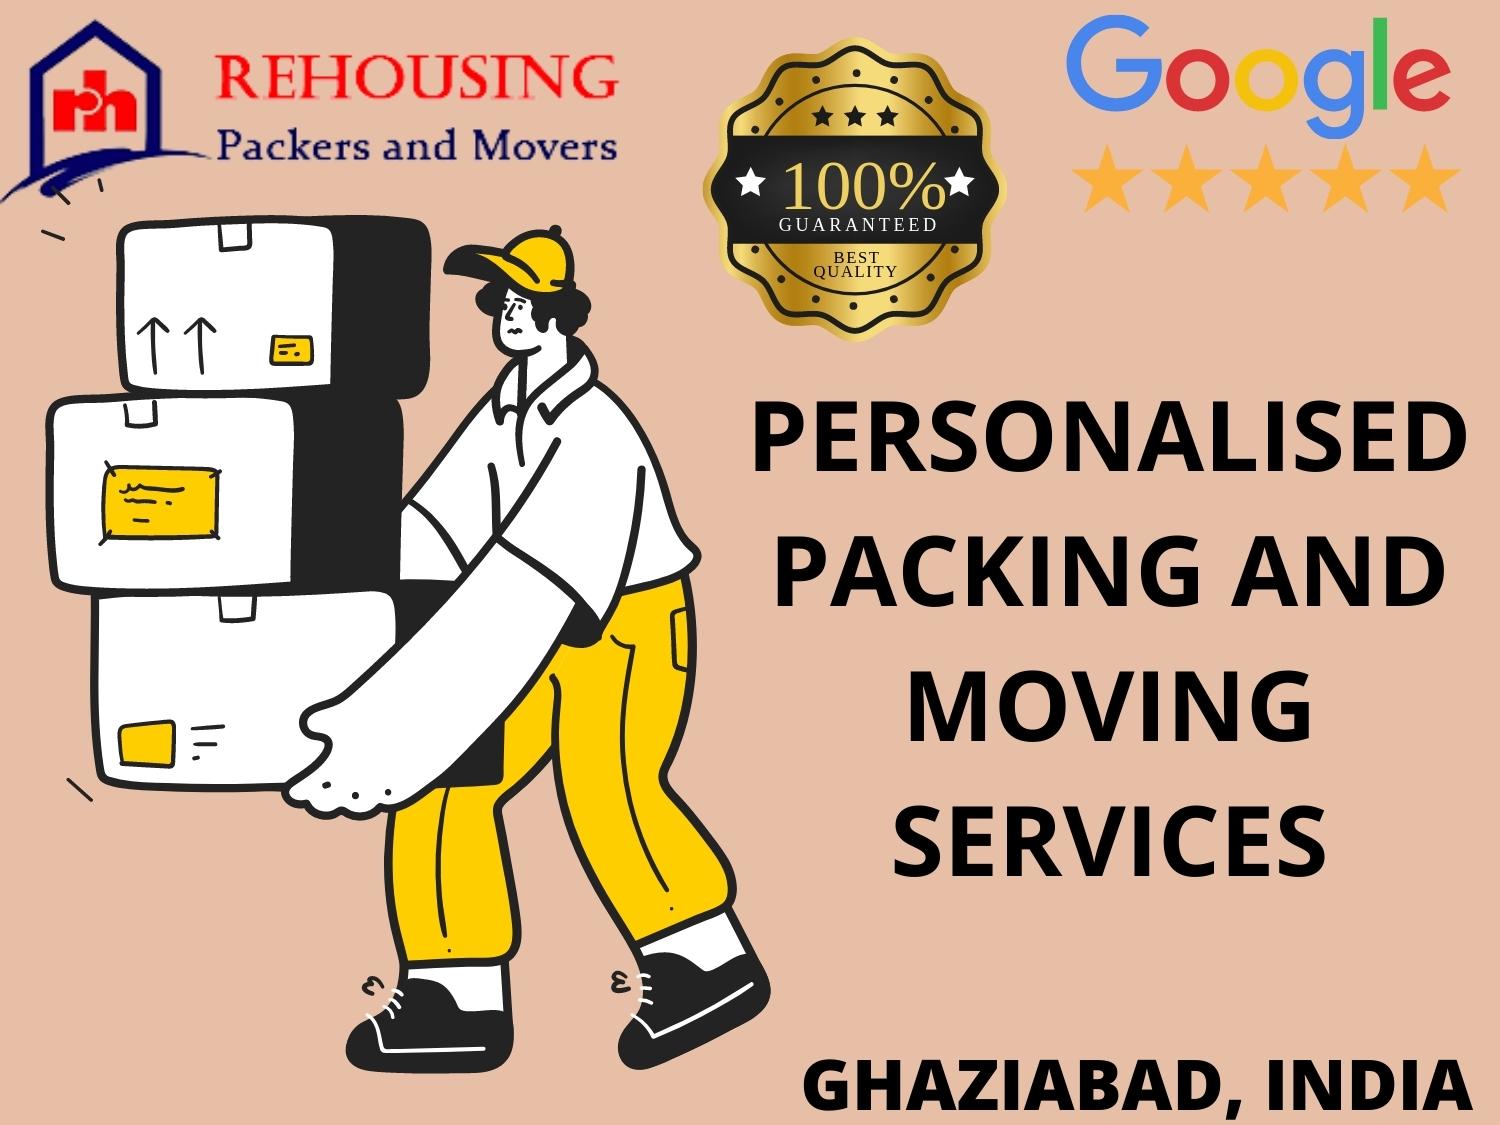 Looking for the best packers and movers in Ghaziabad